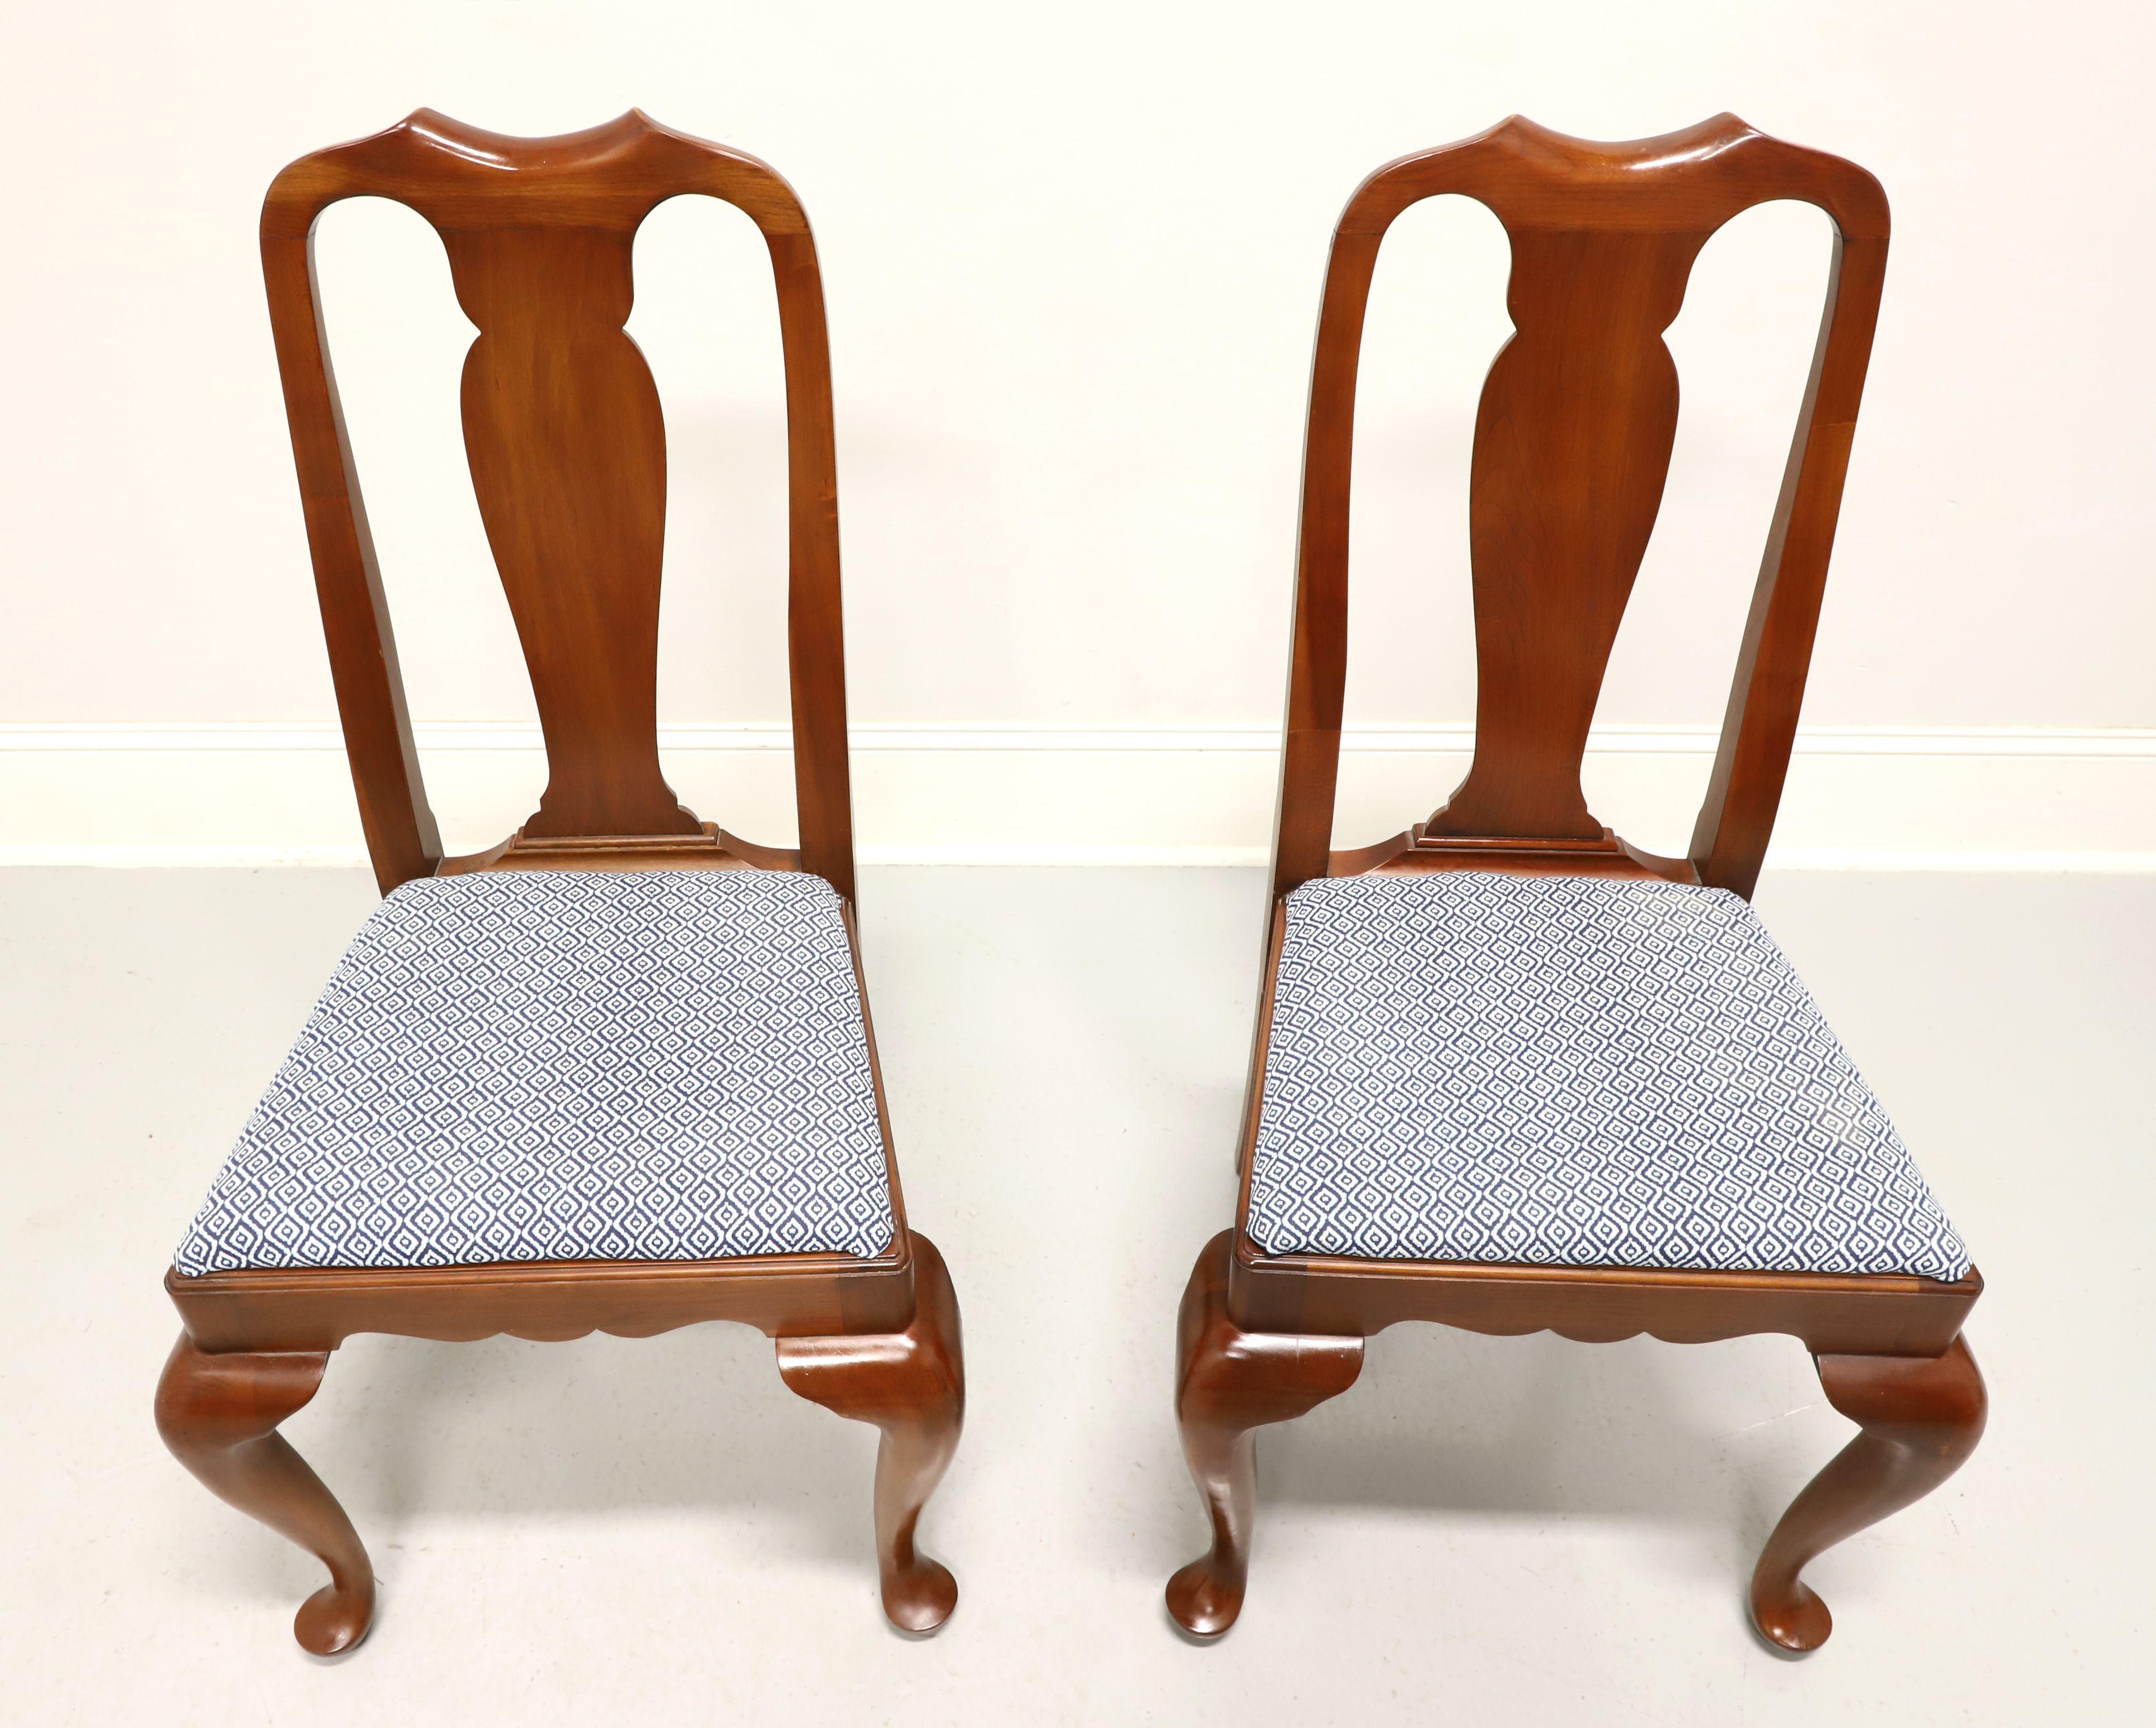 A pair of Queen Anne style dining side chairs by Henkel Harris, of Winchester, Virginia, USA. Solid wild black cherry, carved center backrest, upholstered seat in a light blue & white patterned fabric, carved apron, cabriole legs and pad feet. Made